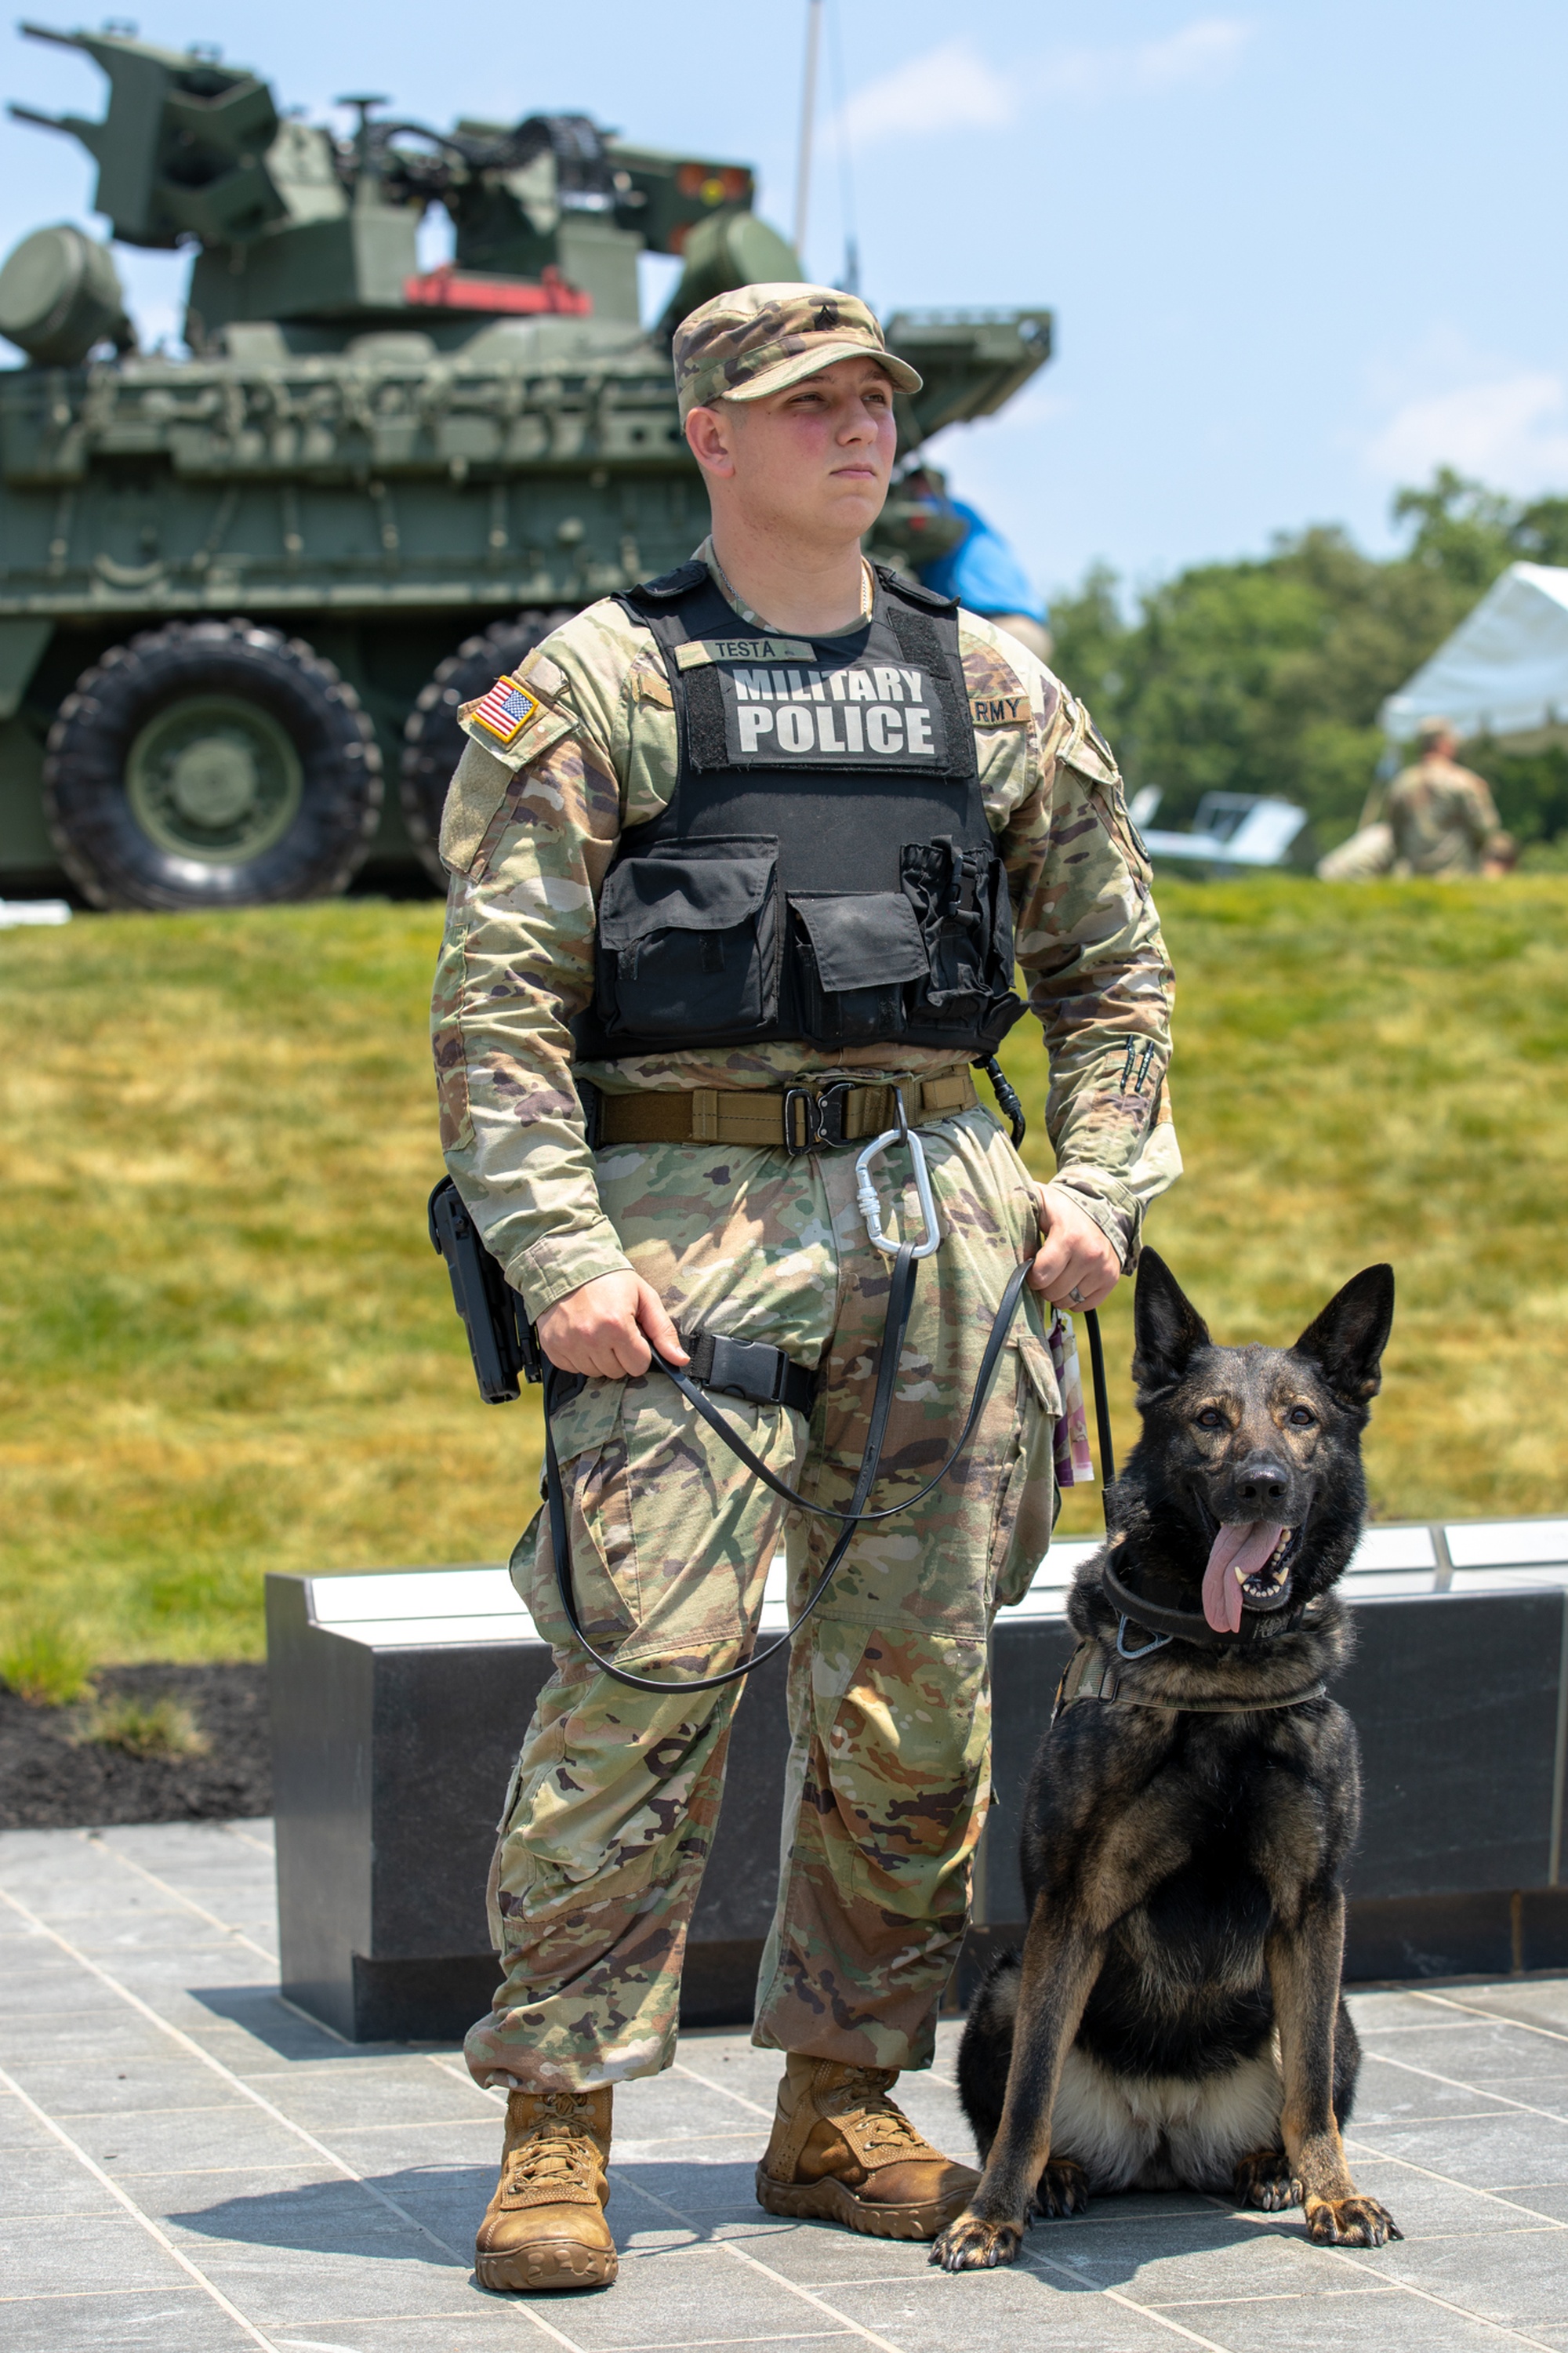 DVIDS - Images - Showcasing military working dog capabilities at